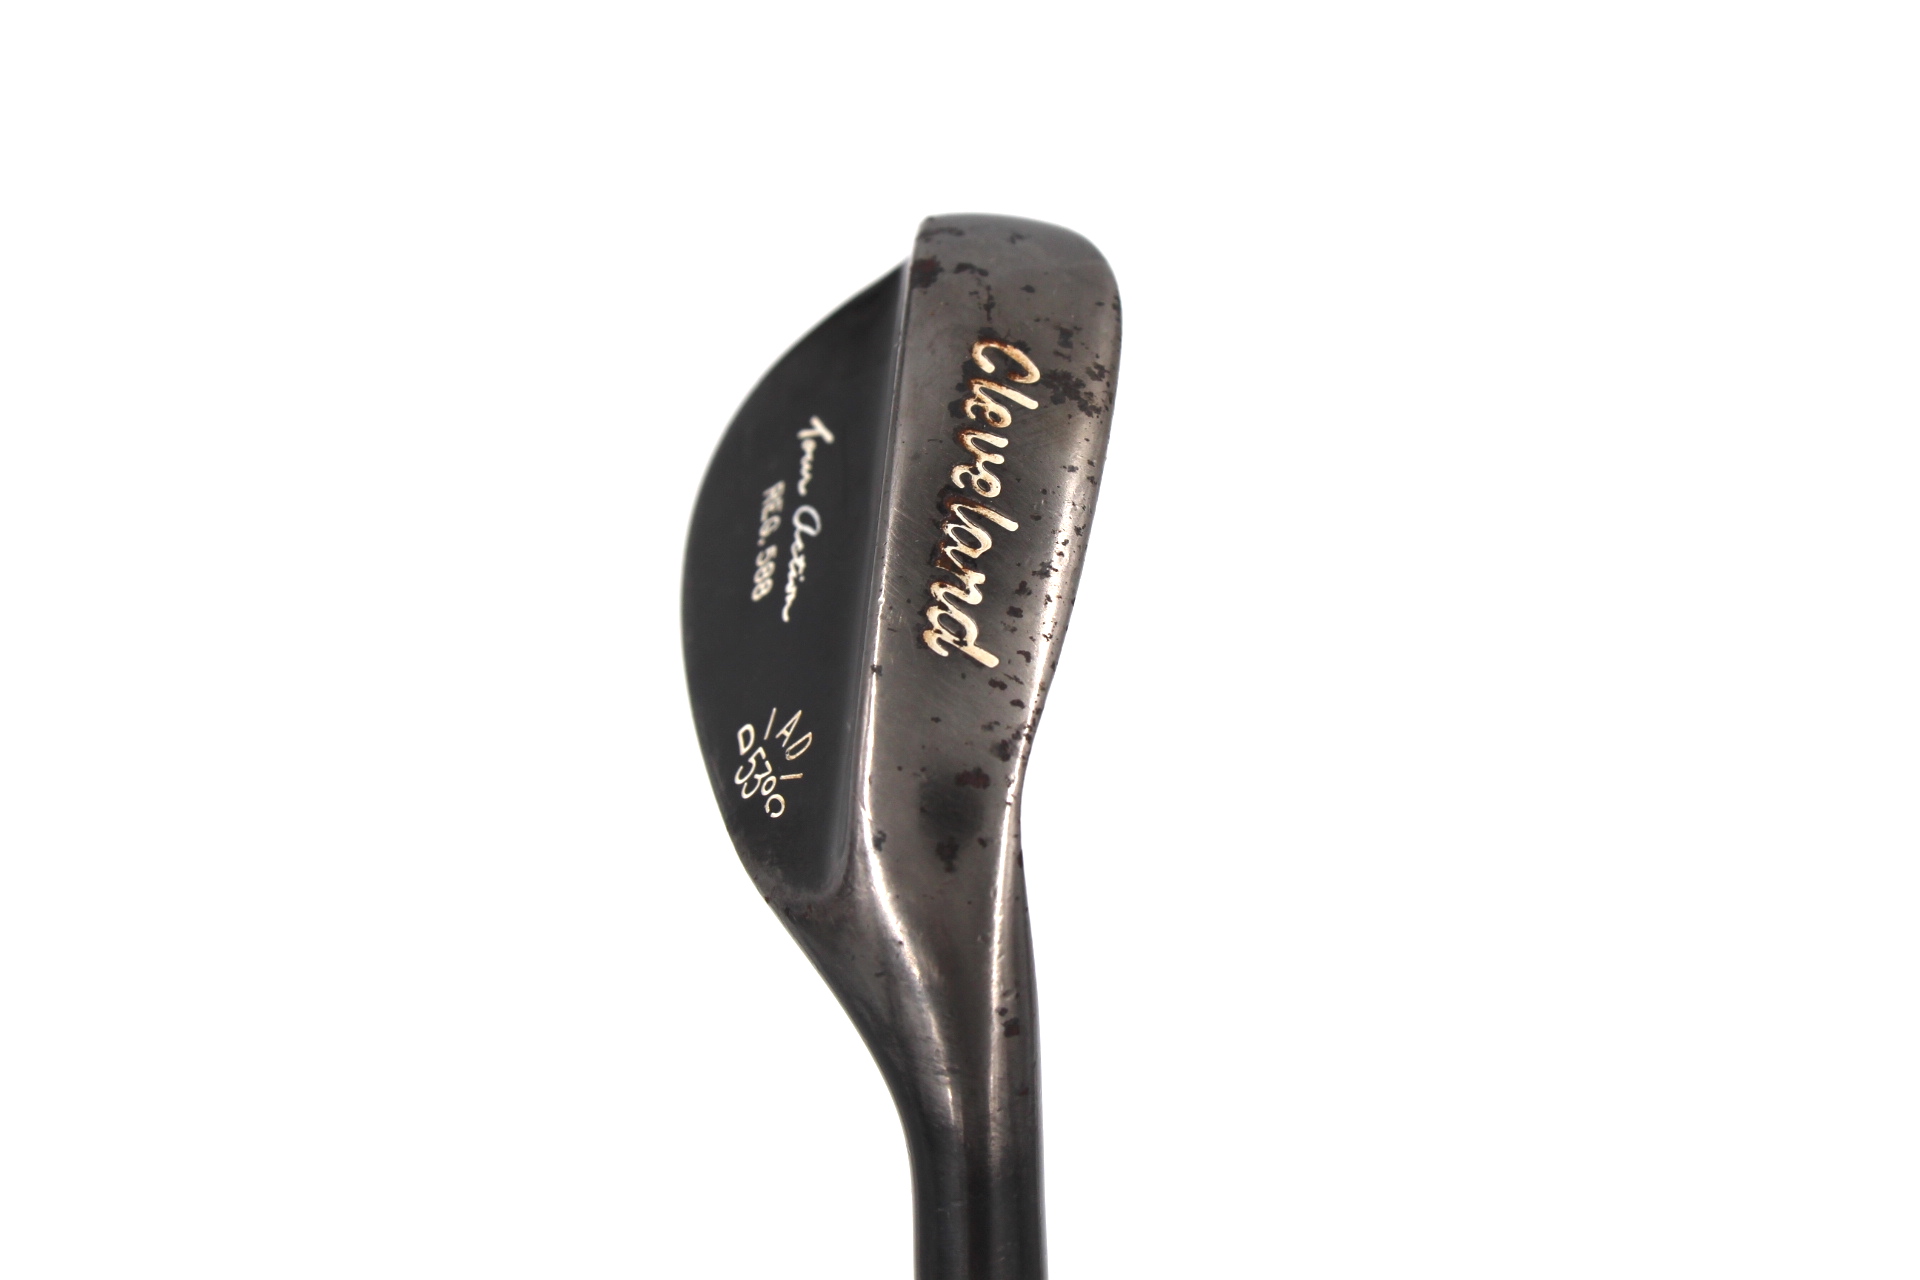 cleveland tour action wedge 588